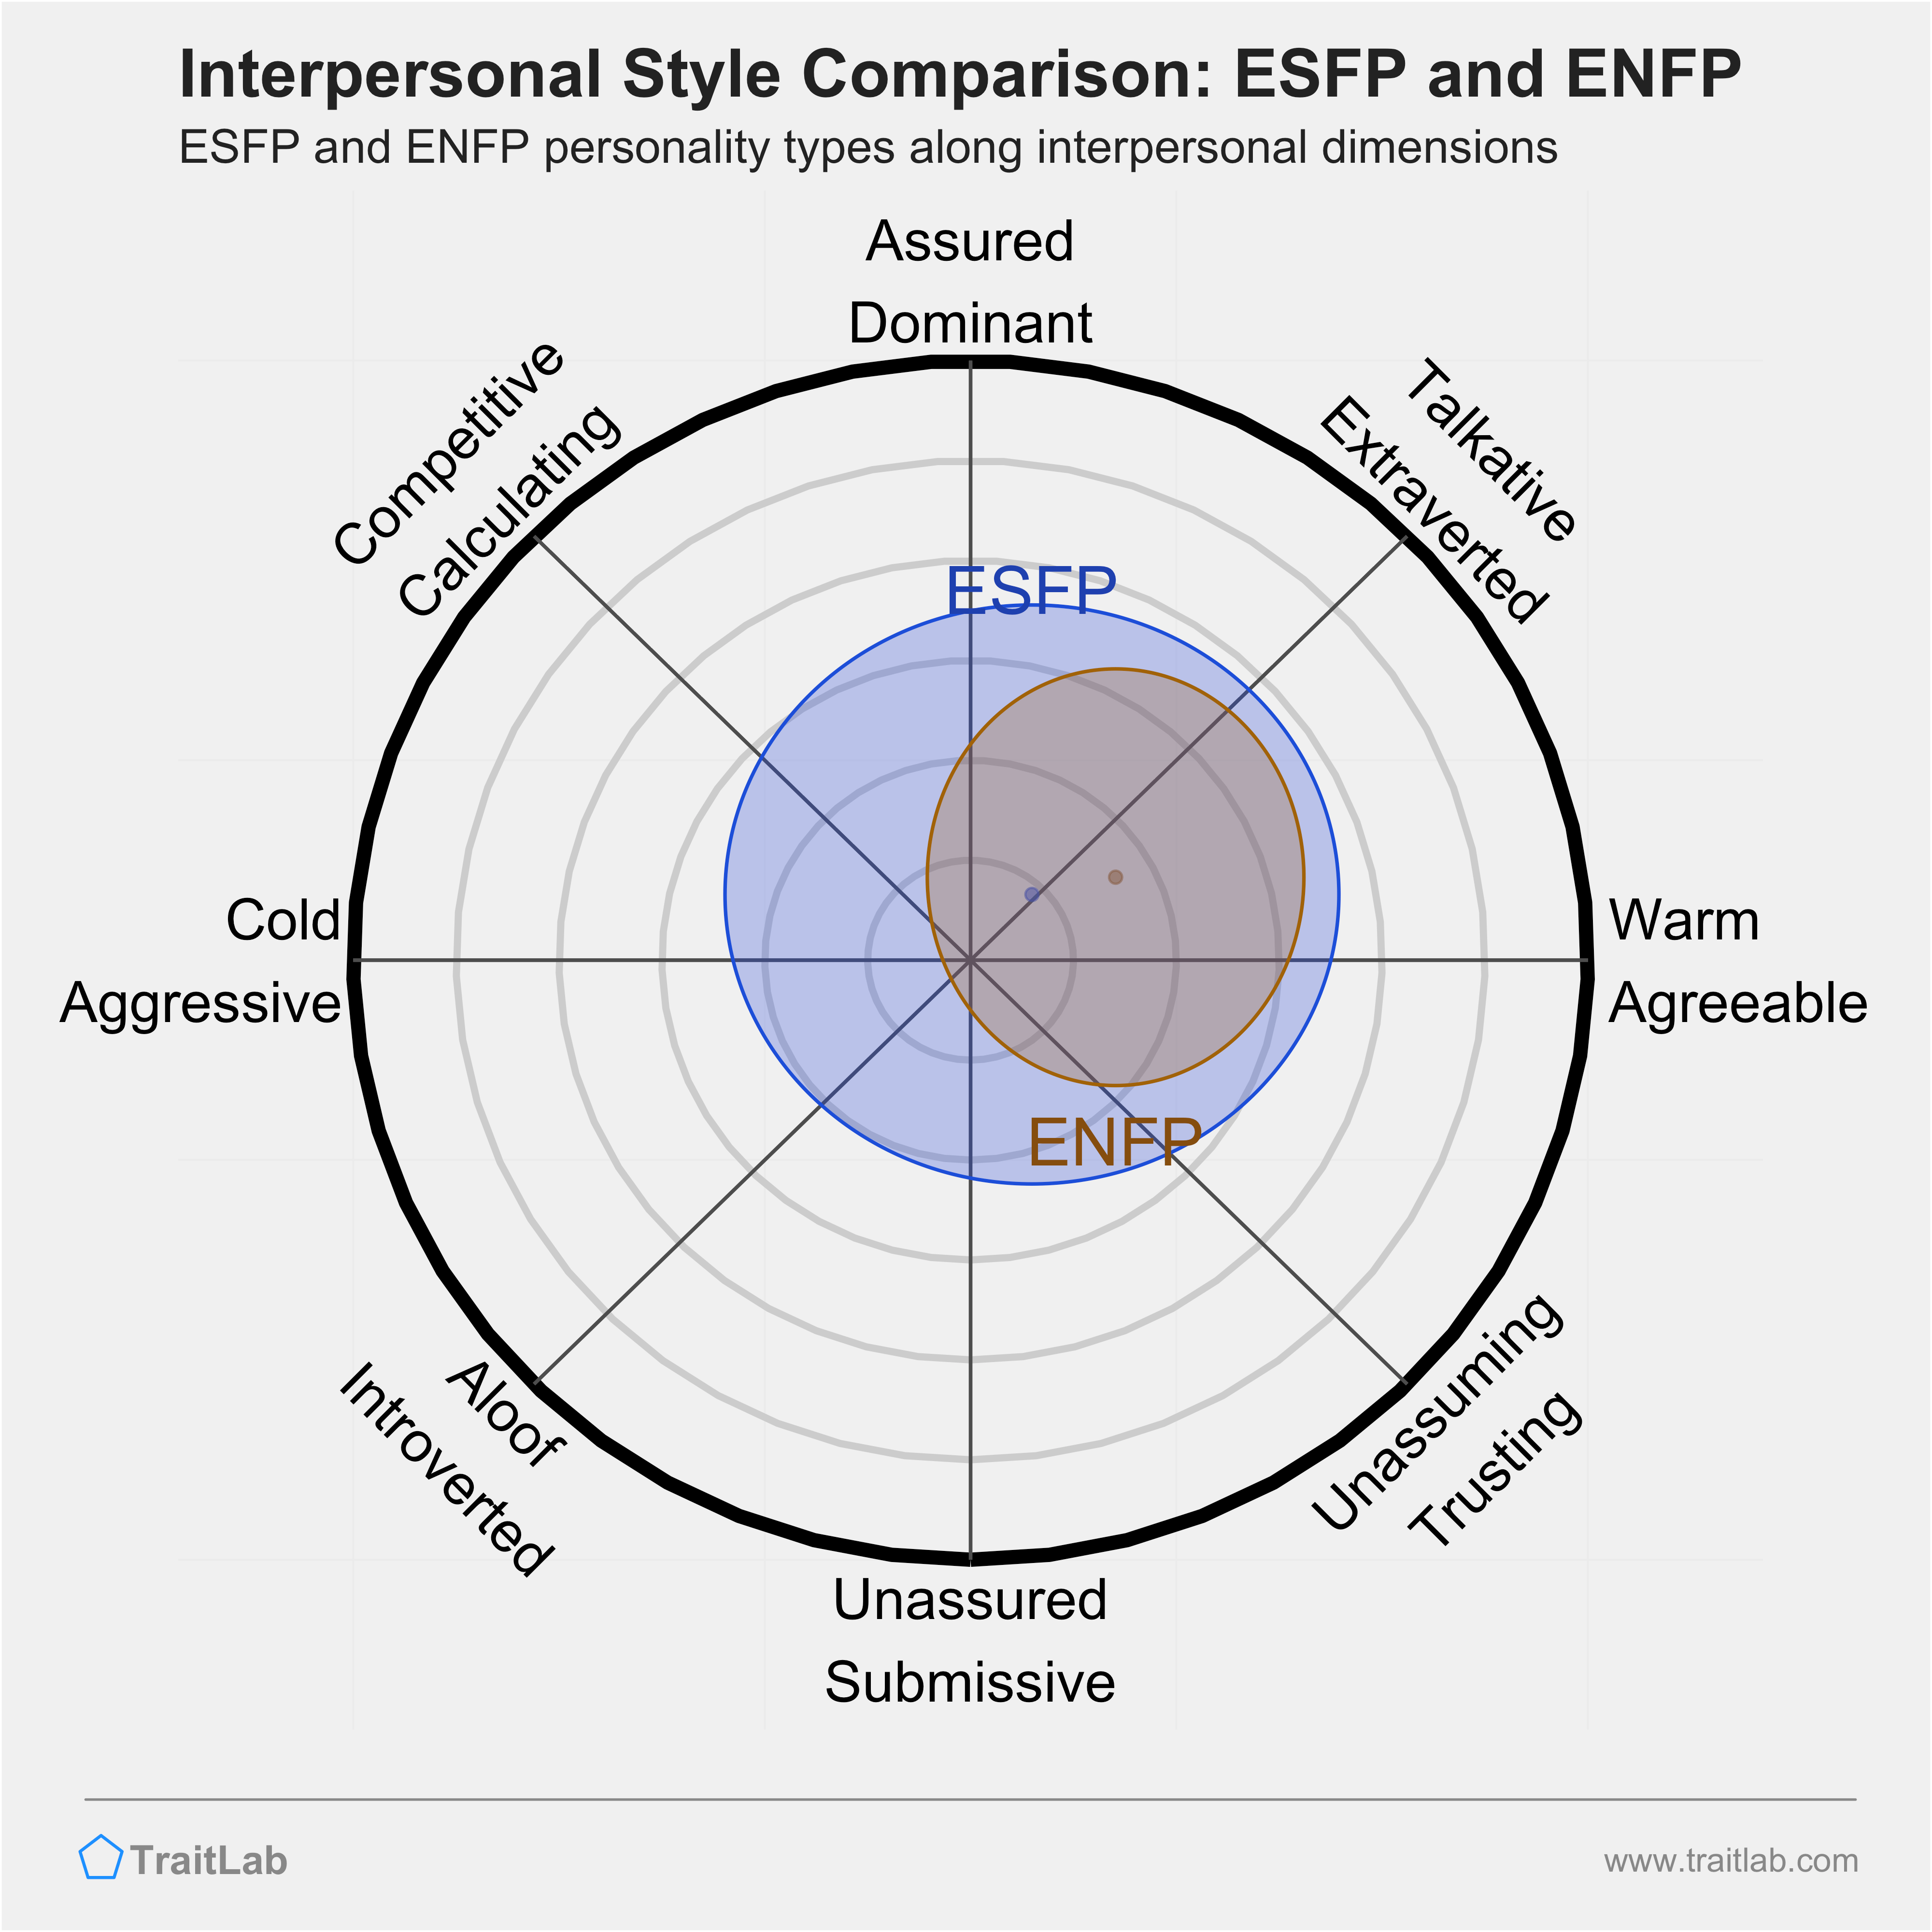 ESFP and ENFP comparison across interpersonal dimensions